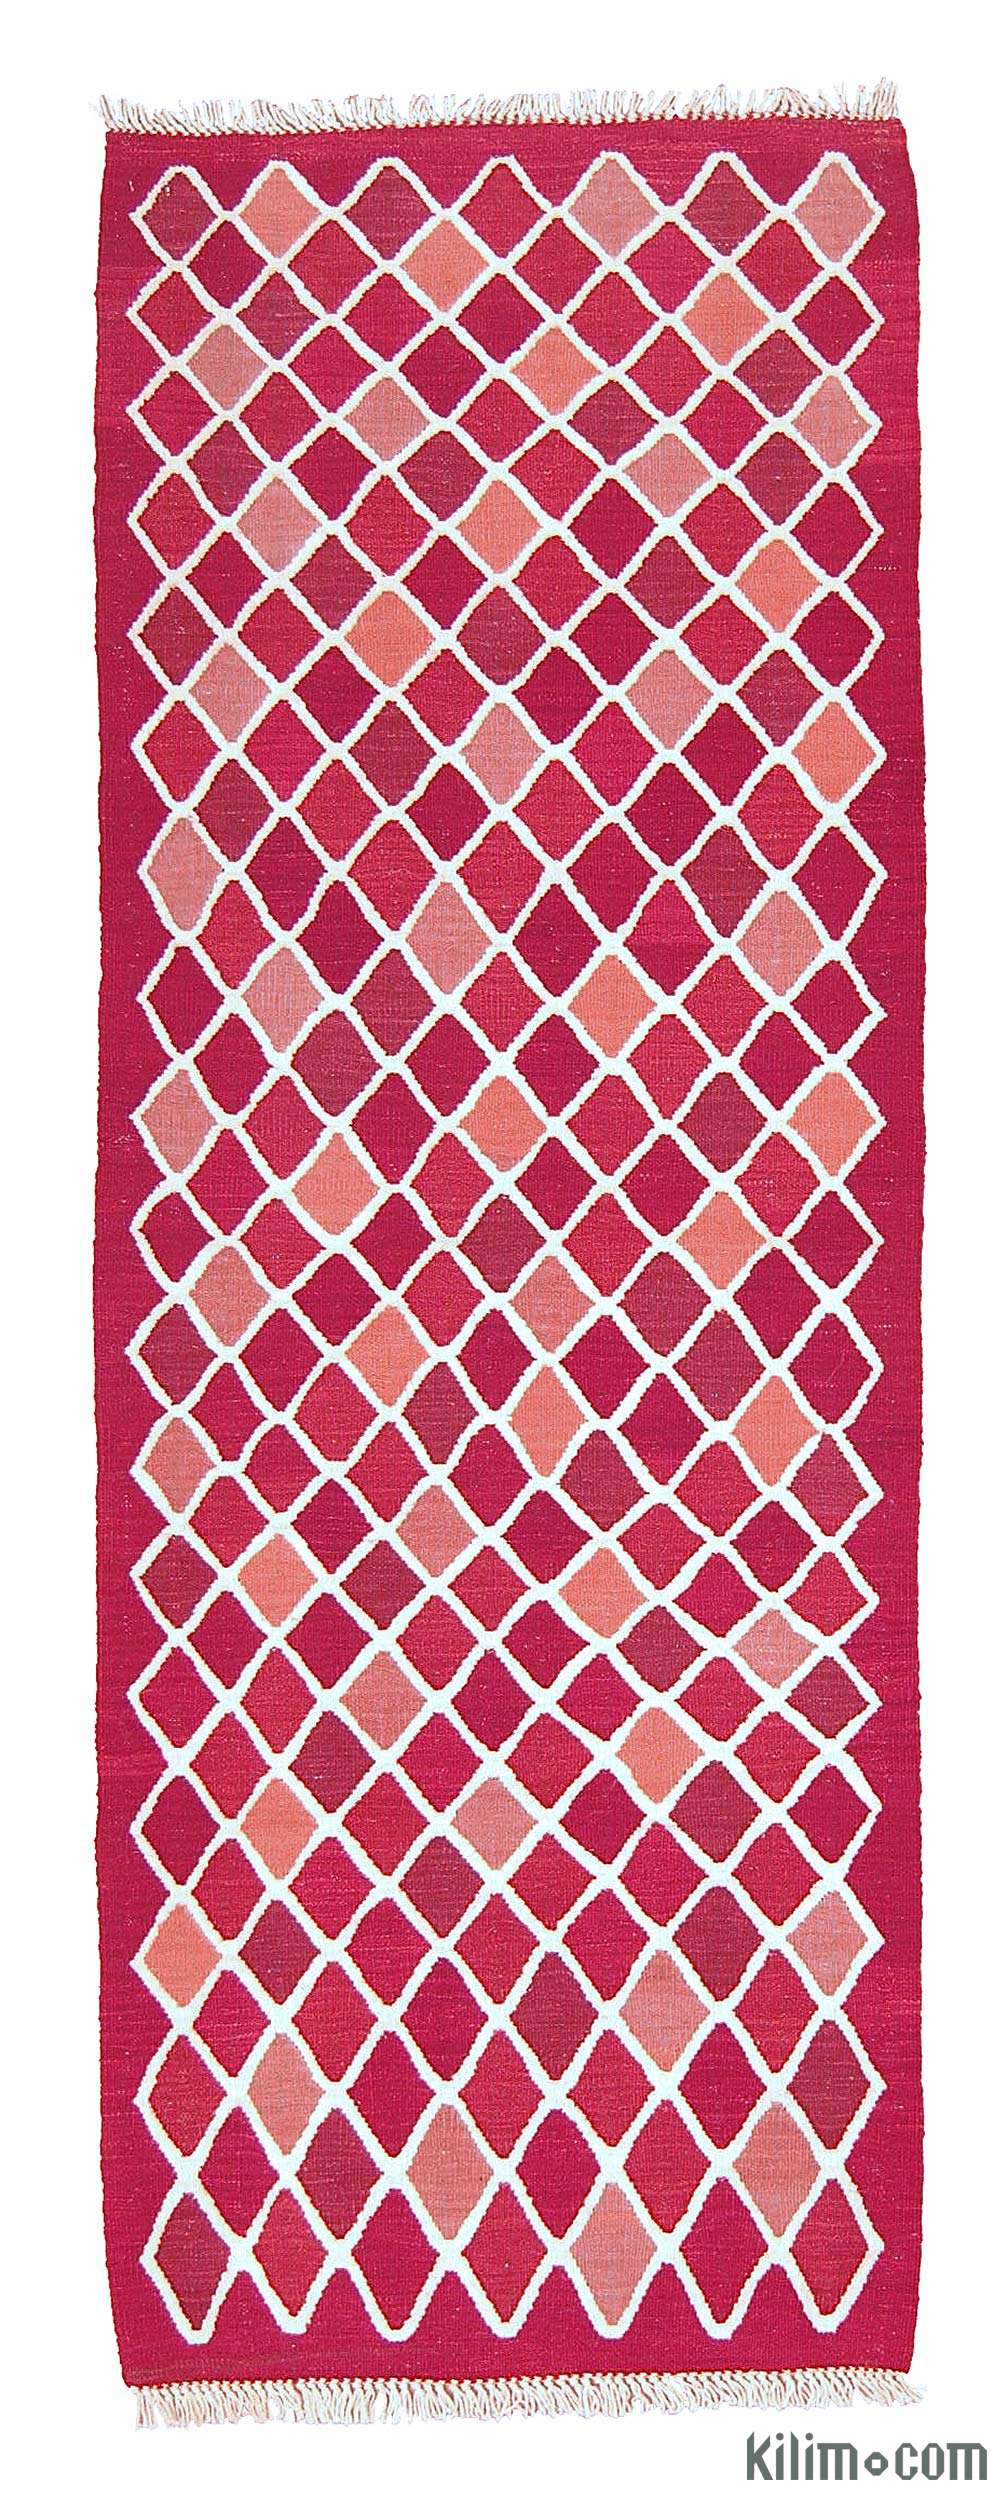 Pink Traditional RugLarge Kilim RugsAvailable In Hallway RunnerCHEAP 